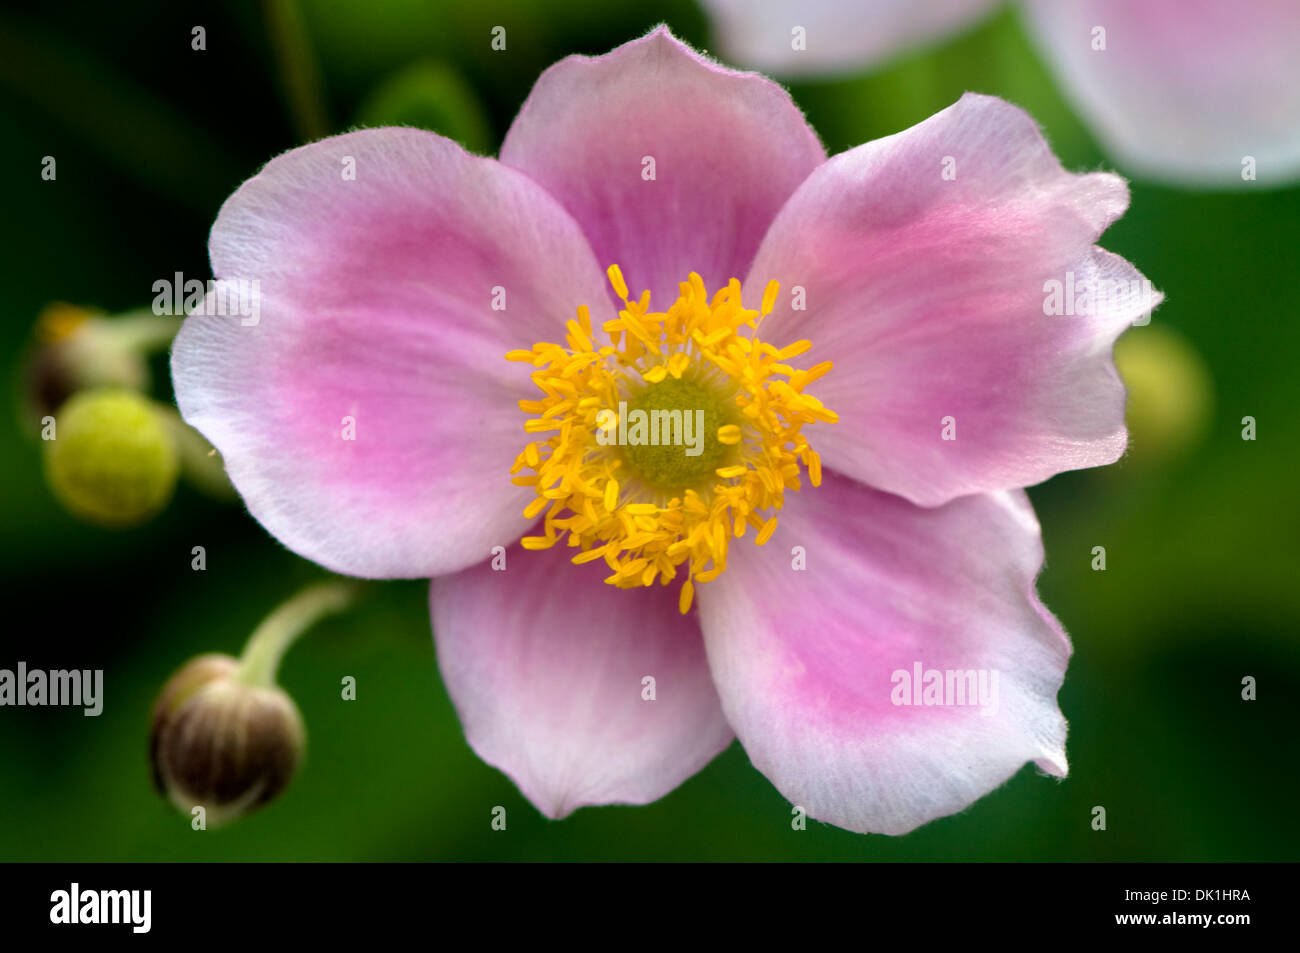 Macro image of a Japanese anemone flower, close-up with its' pink and white delicate petals and pollen filled yellow center. Stock Photo